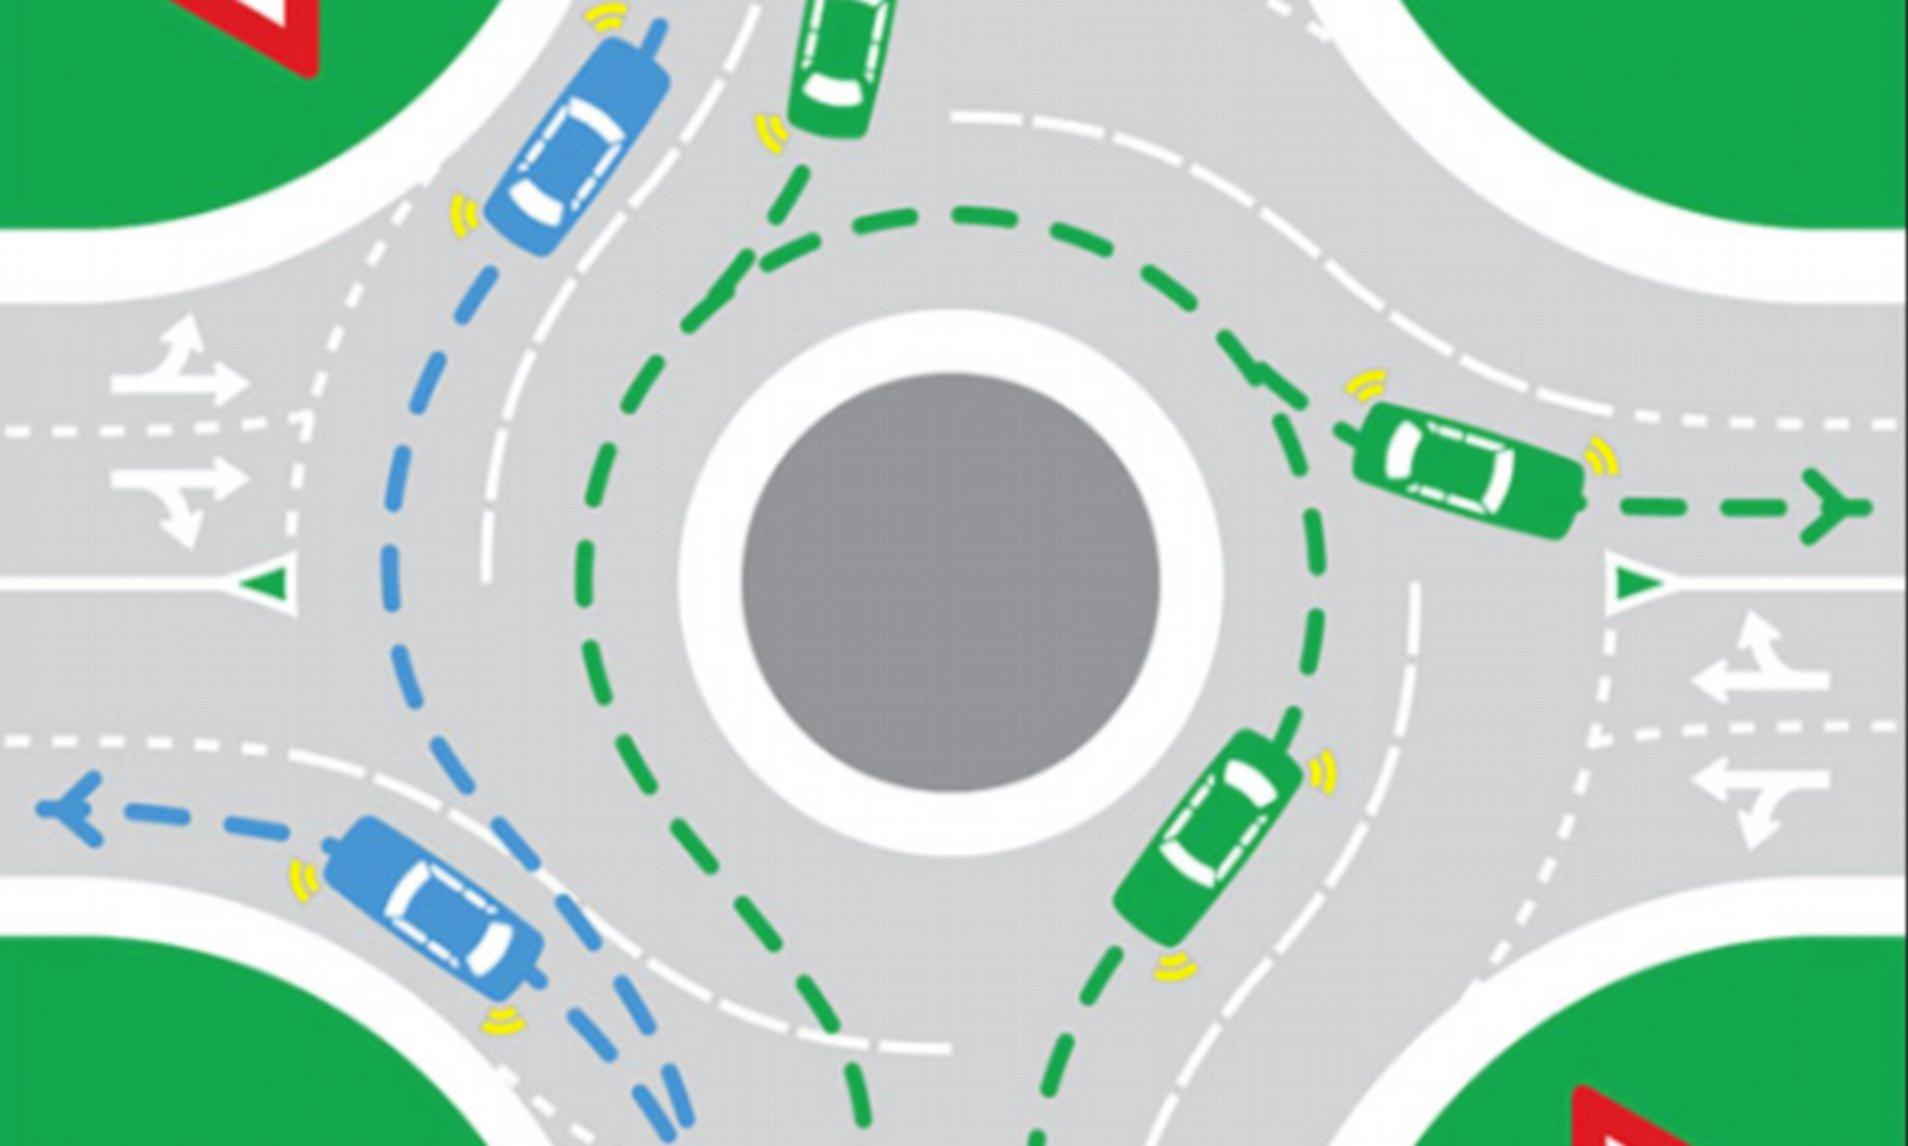 is it legal to change lanes on a roundabout?